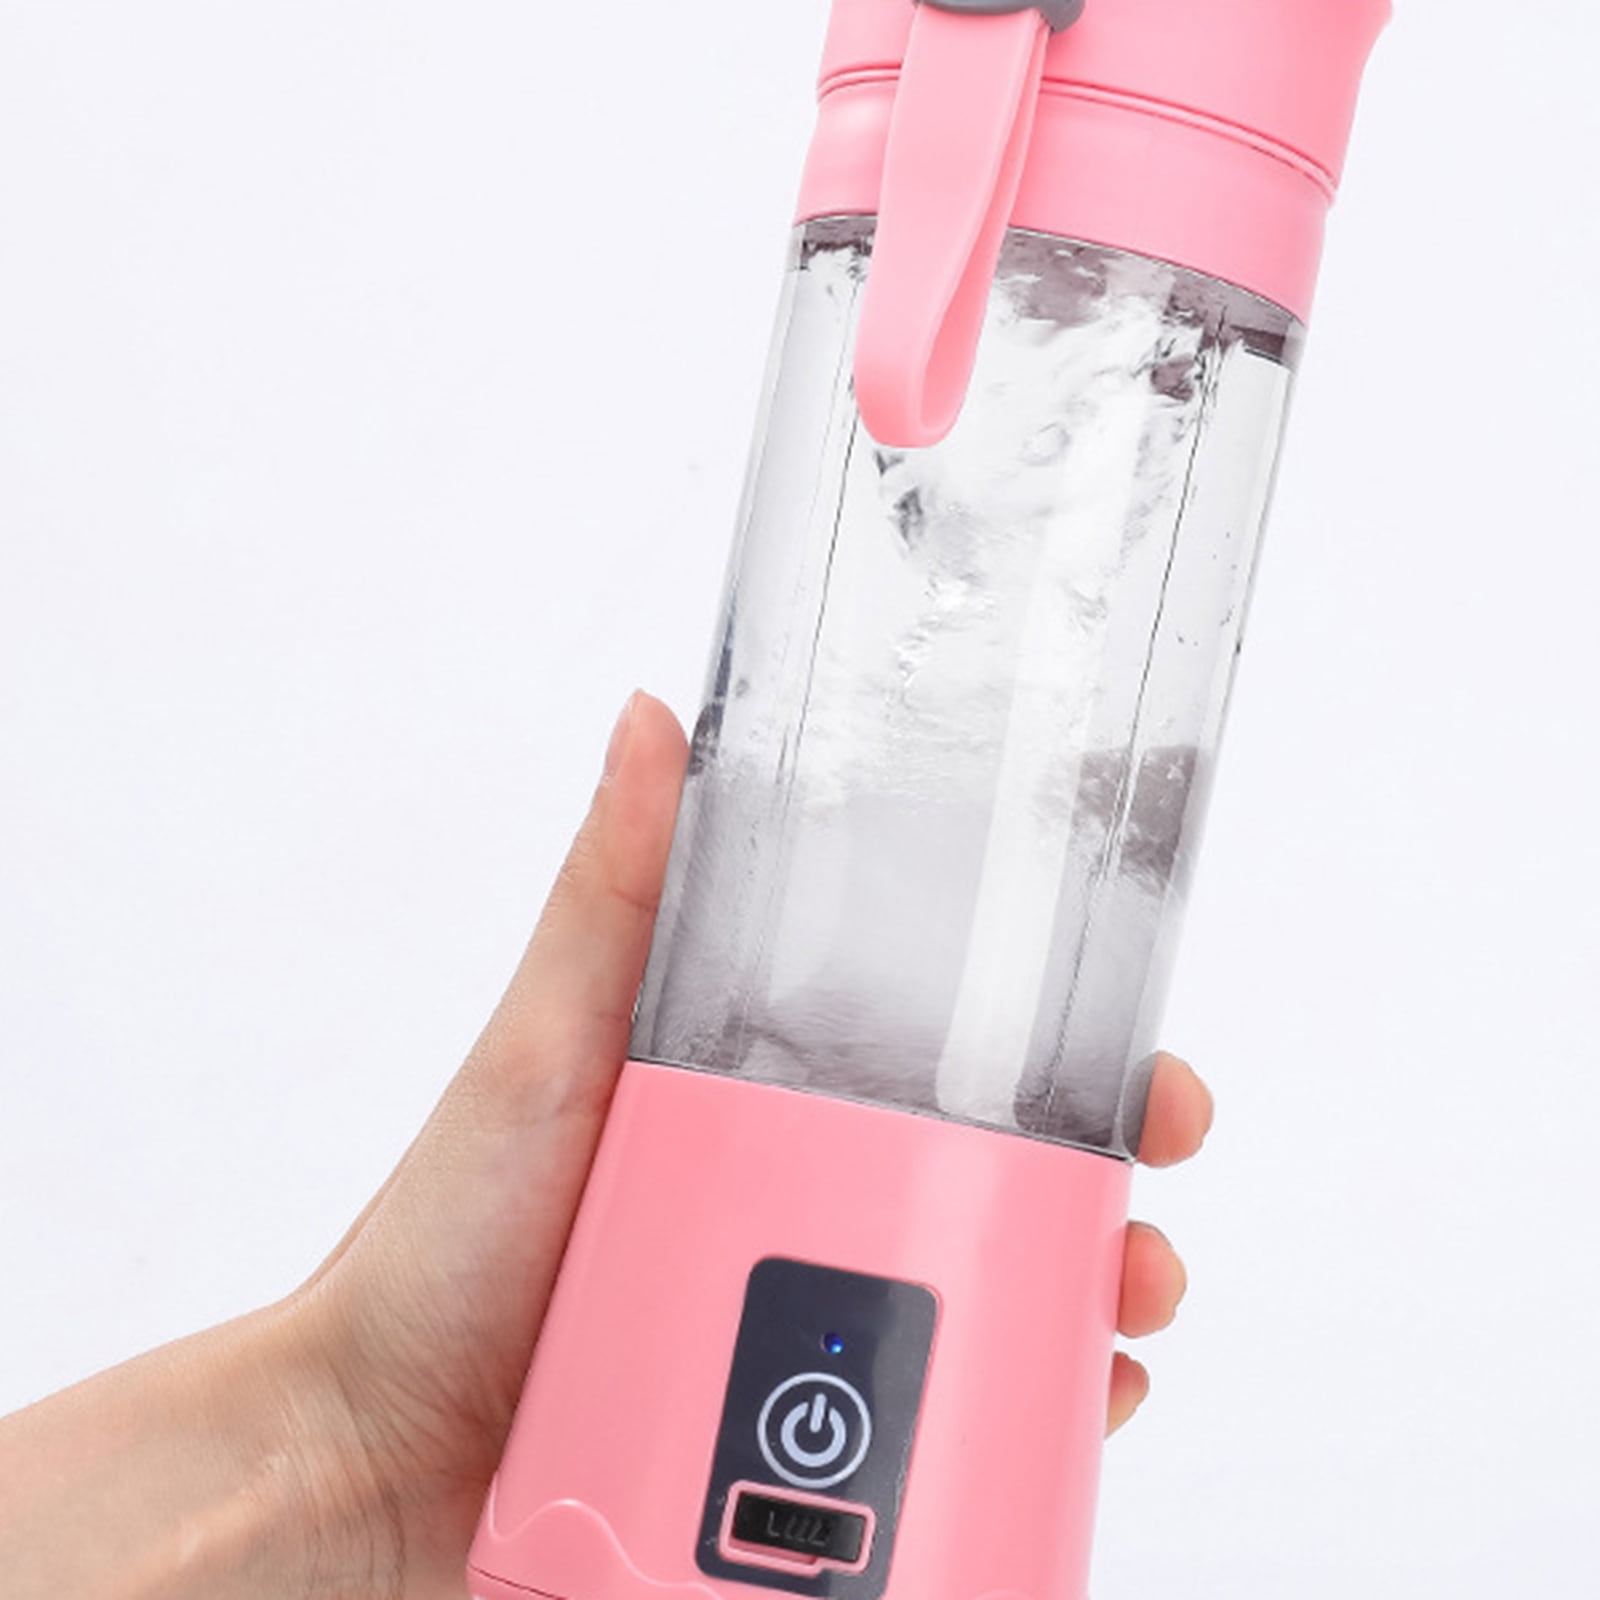 iOCSmart Portable Blender on the go, Mini Blender for Shakes and Smoothies,  Personal Blender USB Rechargeable with 2 Juice Cup (Pink 2)